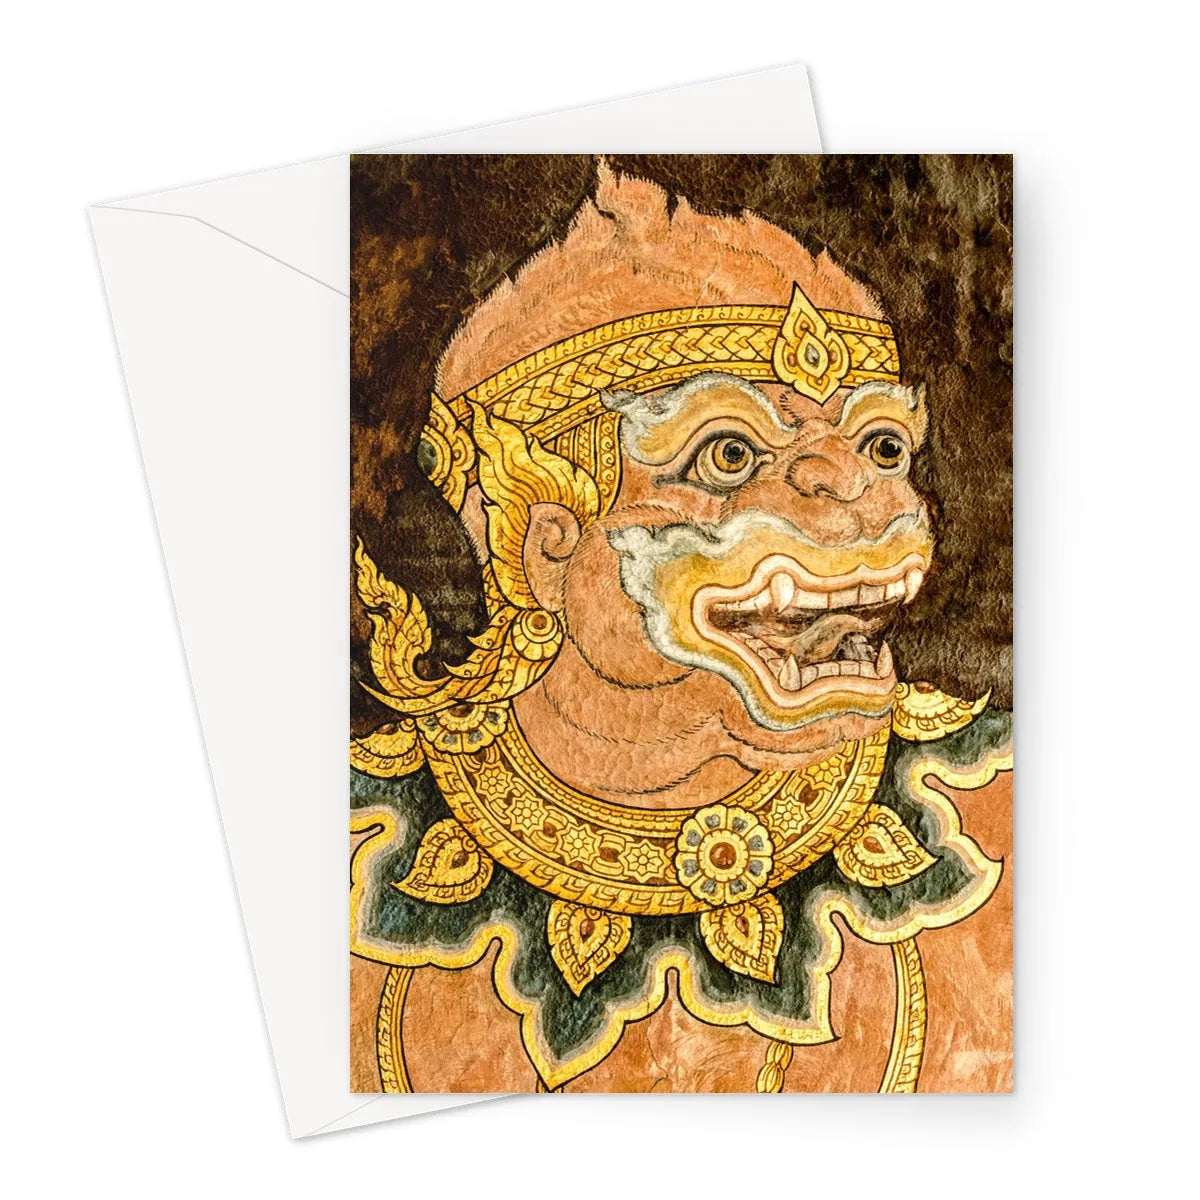 Monkey See Greeting Card - A5 Portrait / 1 Card - Greeting & Note Cards - Aesthetic Art